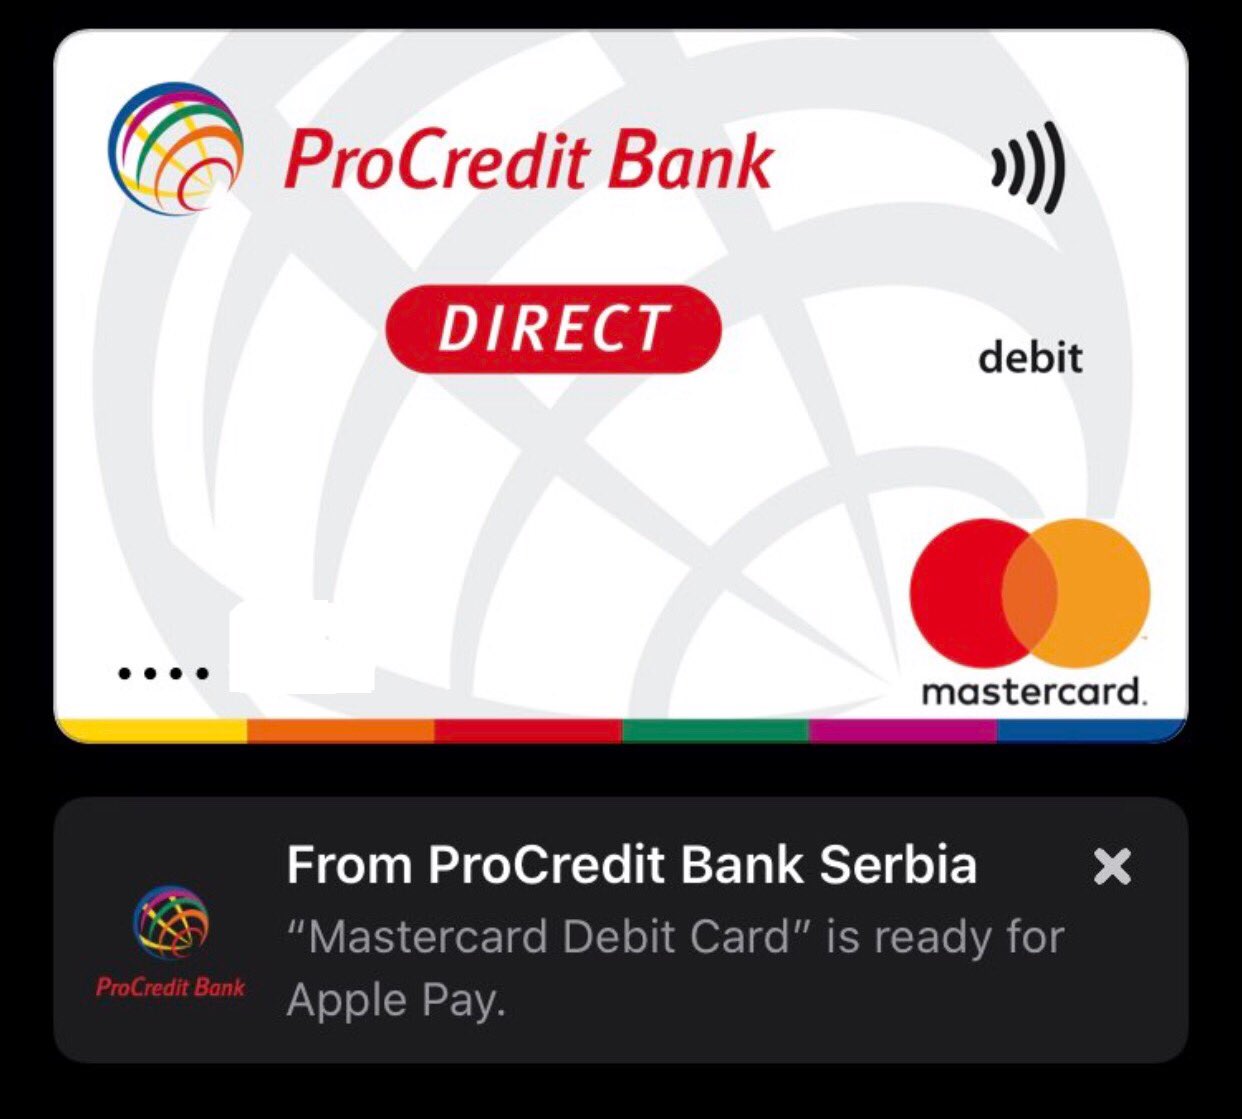 Apple Pay Support Launches in Serbia